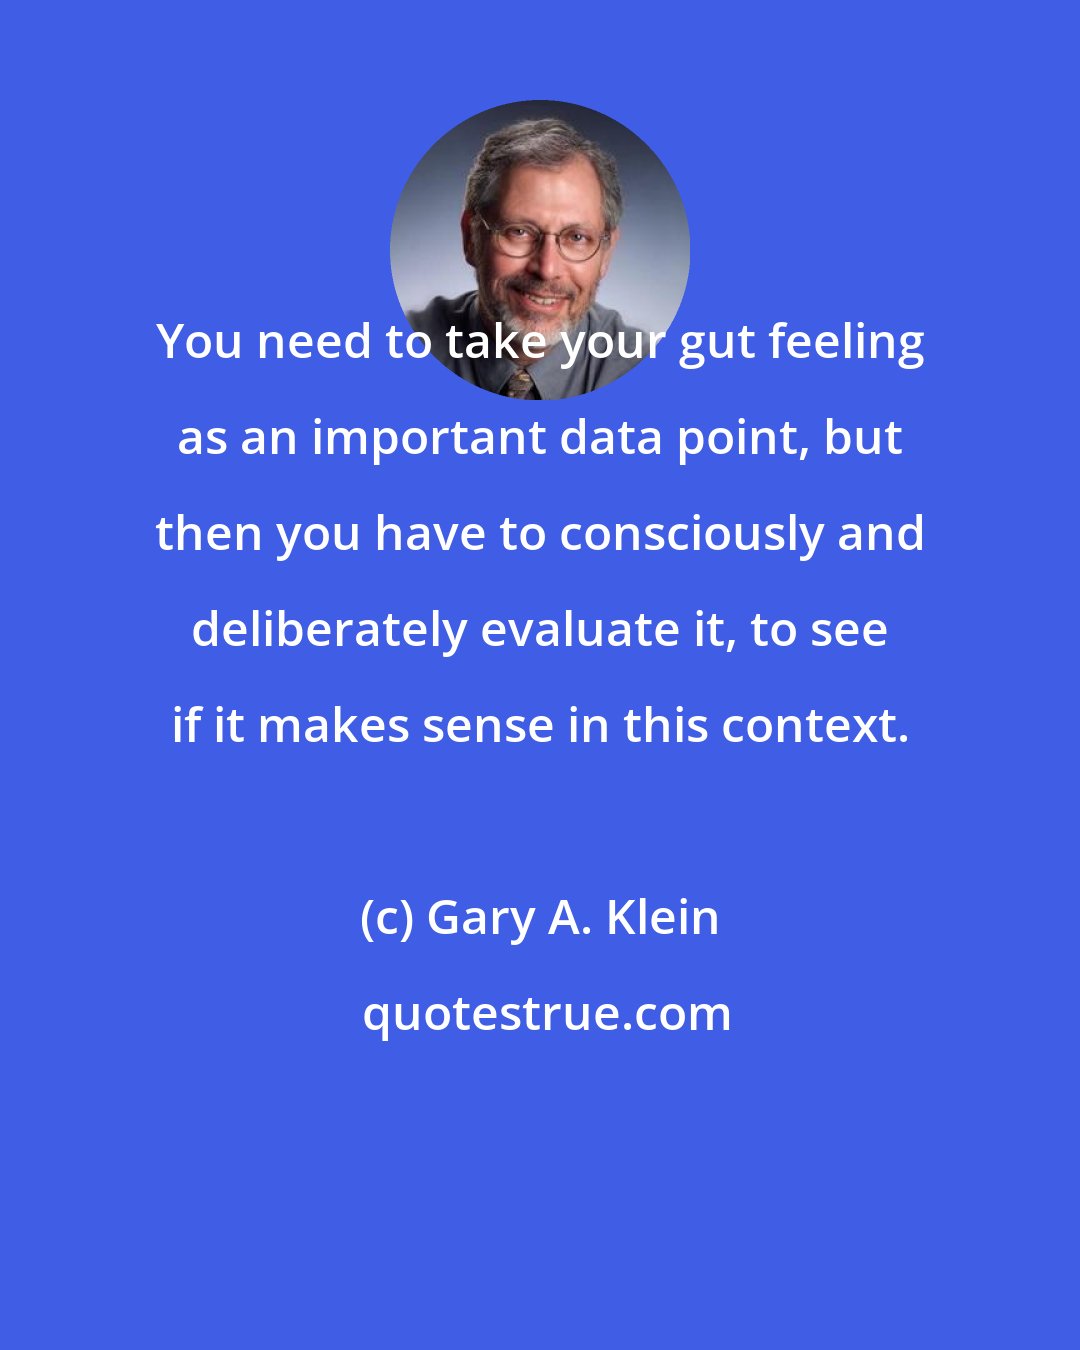 Gary A. Klein: You need to take your gut feeling as an important data point, but then you have to consciously and deliberately evaluate it, to see if it makes sense in this context.